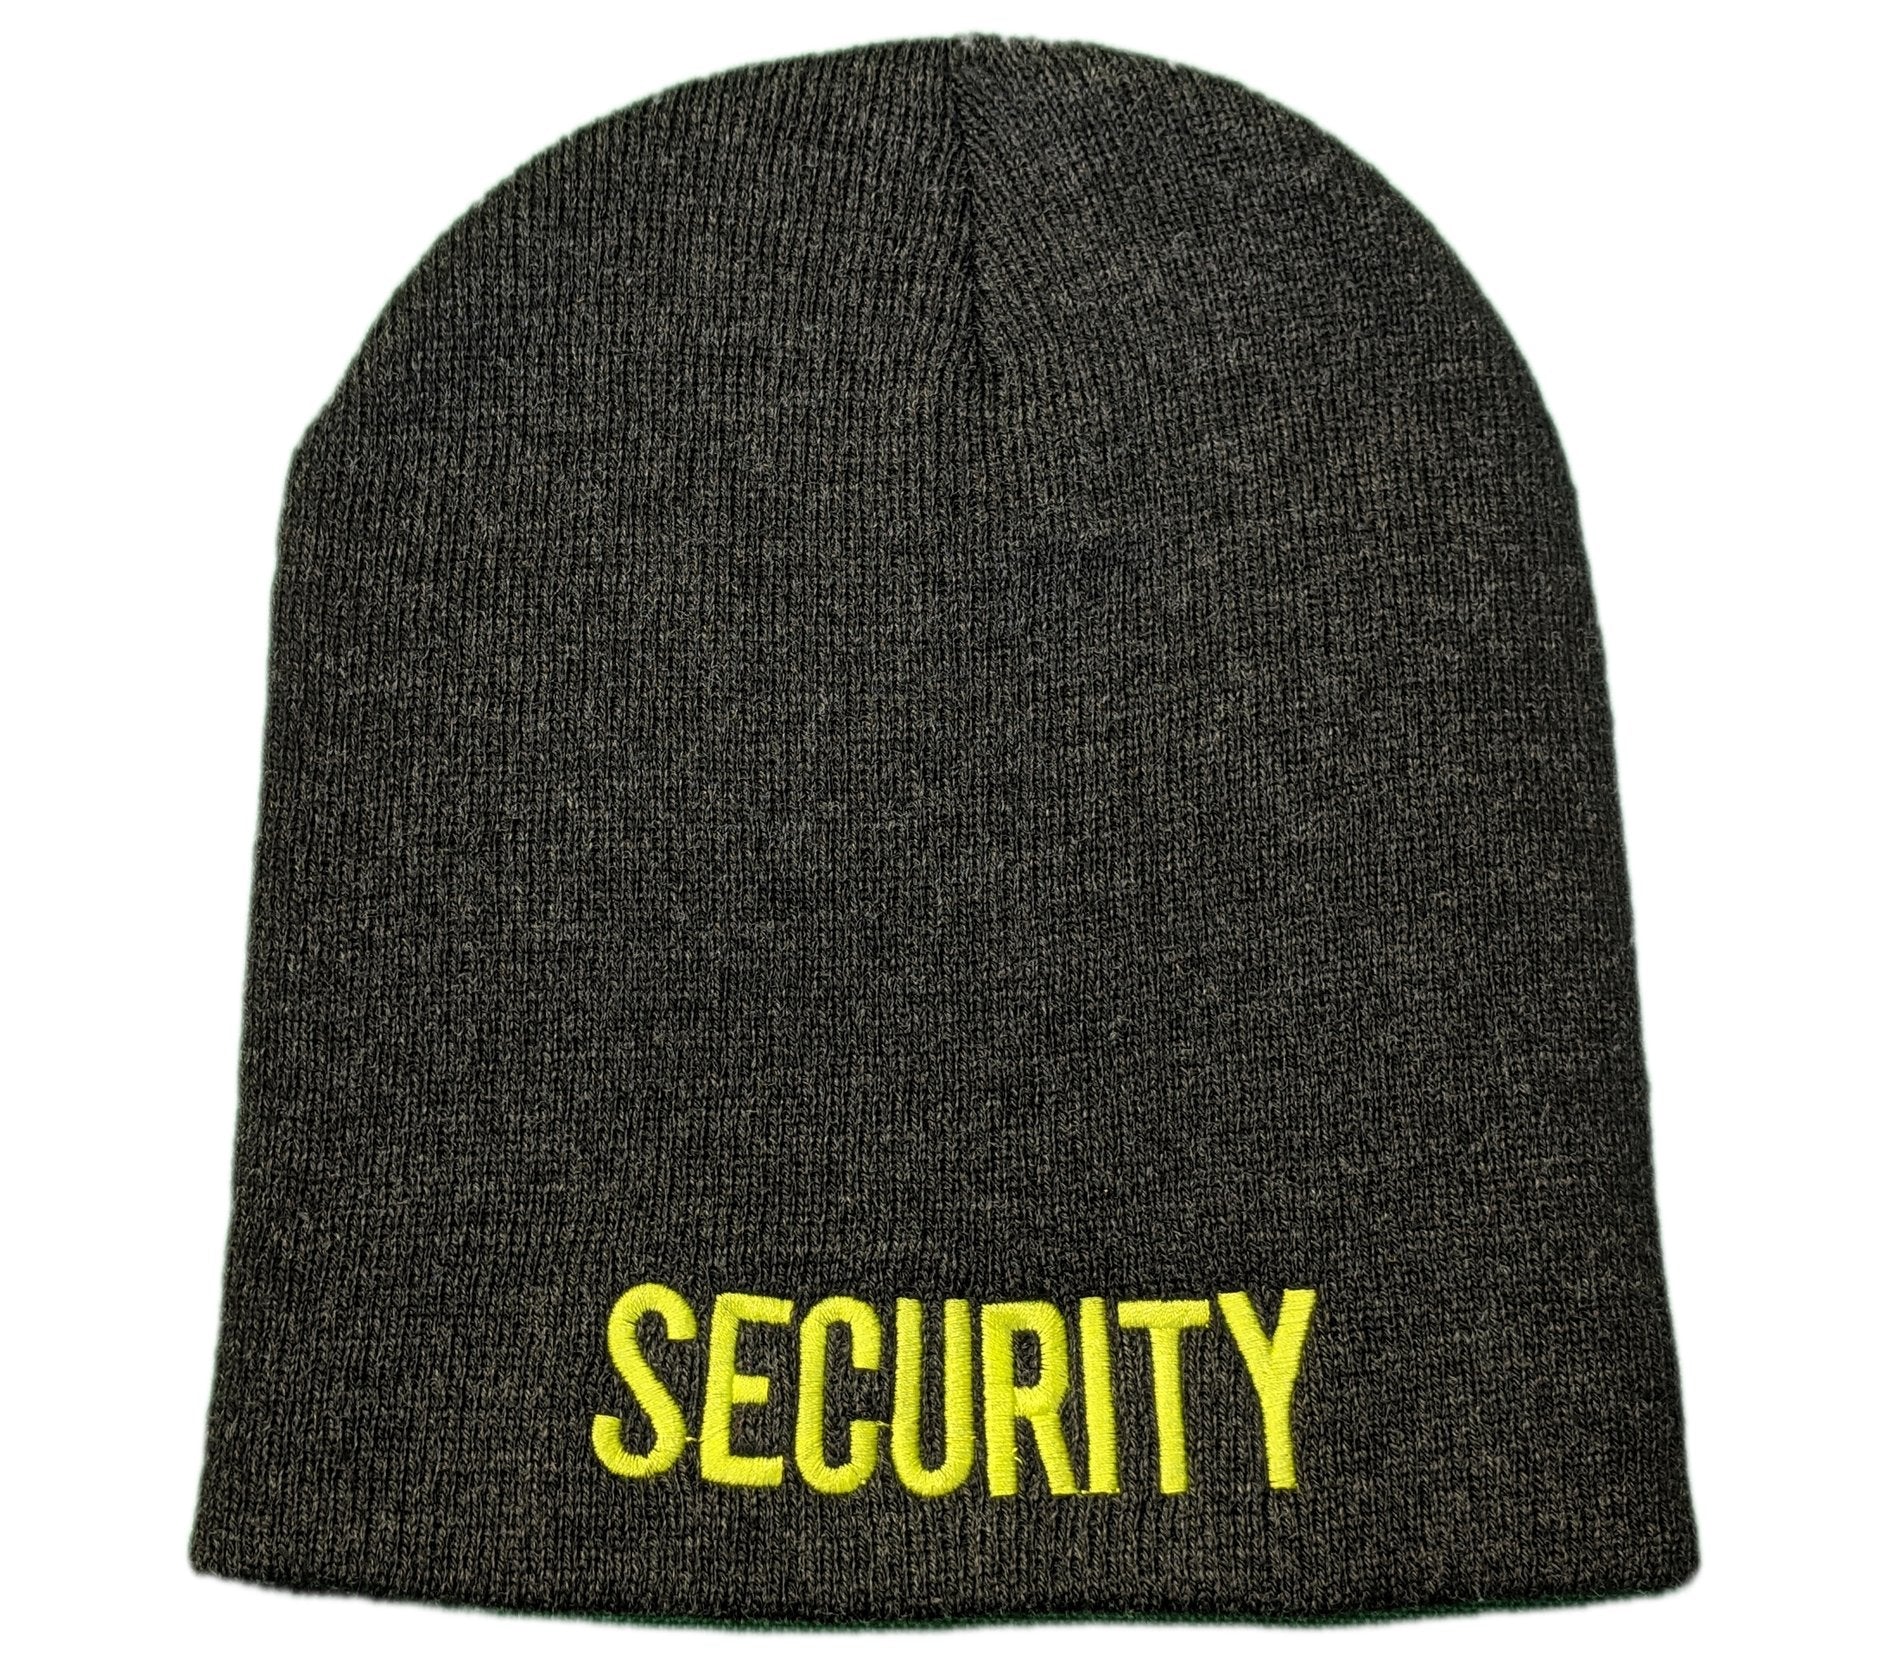 Men's Security Beanie (Charcoal / Neon)